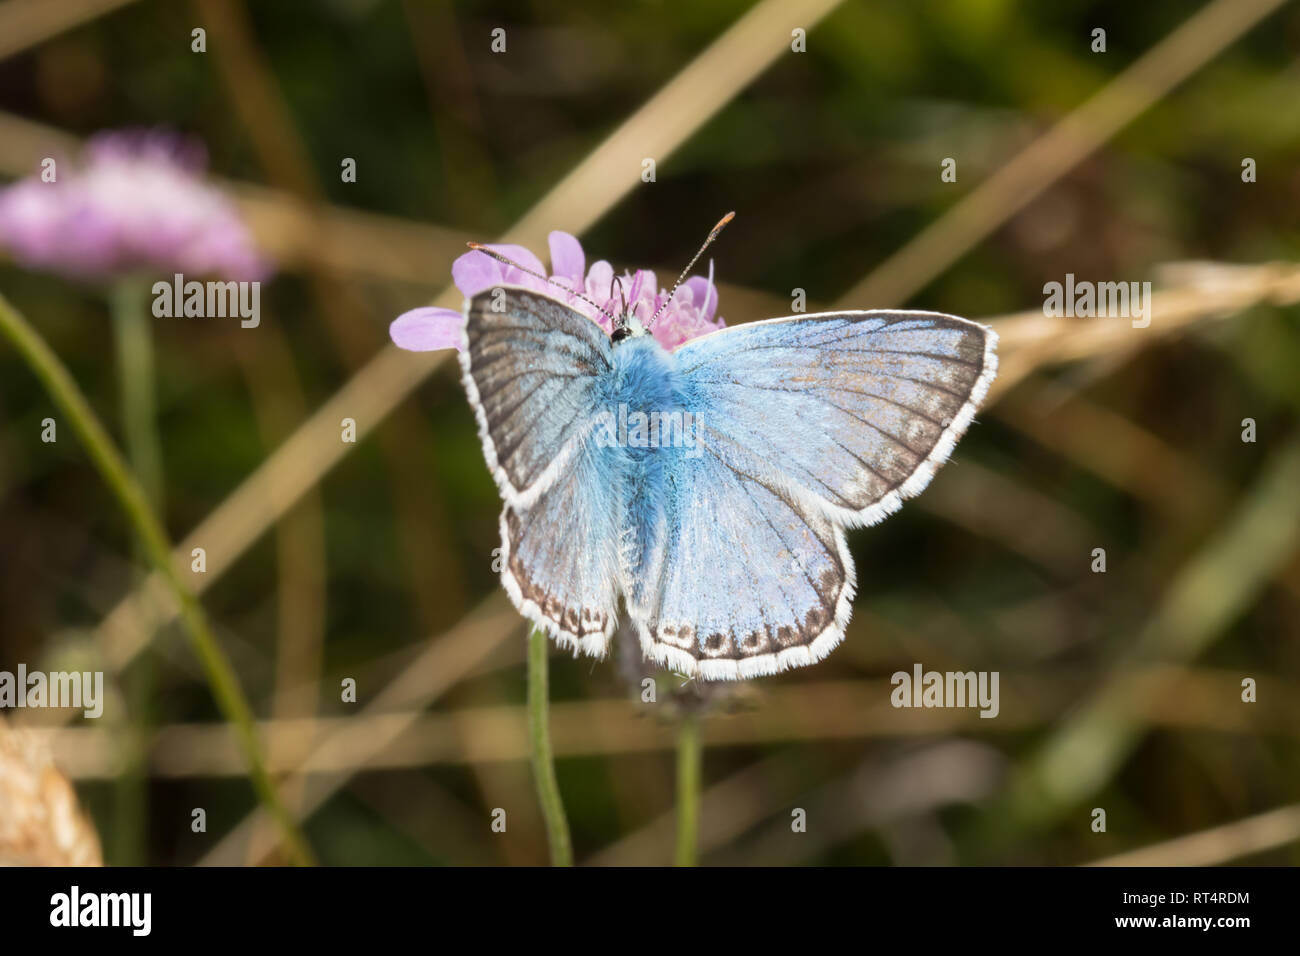 A Chalkhill Blue butterfly(Polyommatus coridon) from the family Lycaenidae, feeding form a flower. Stock Photo